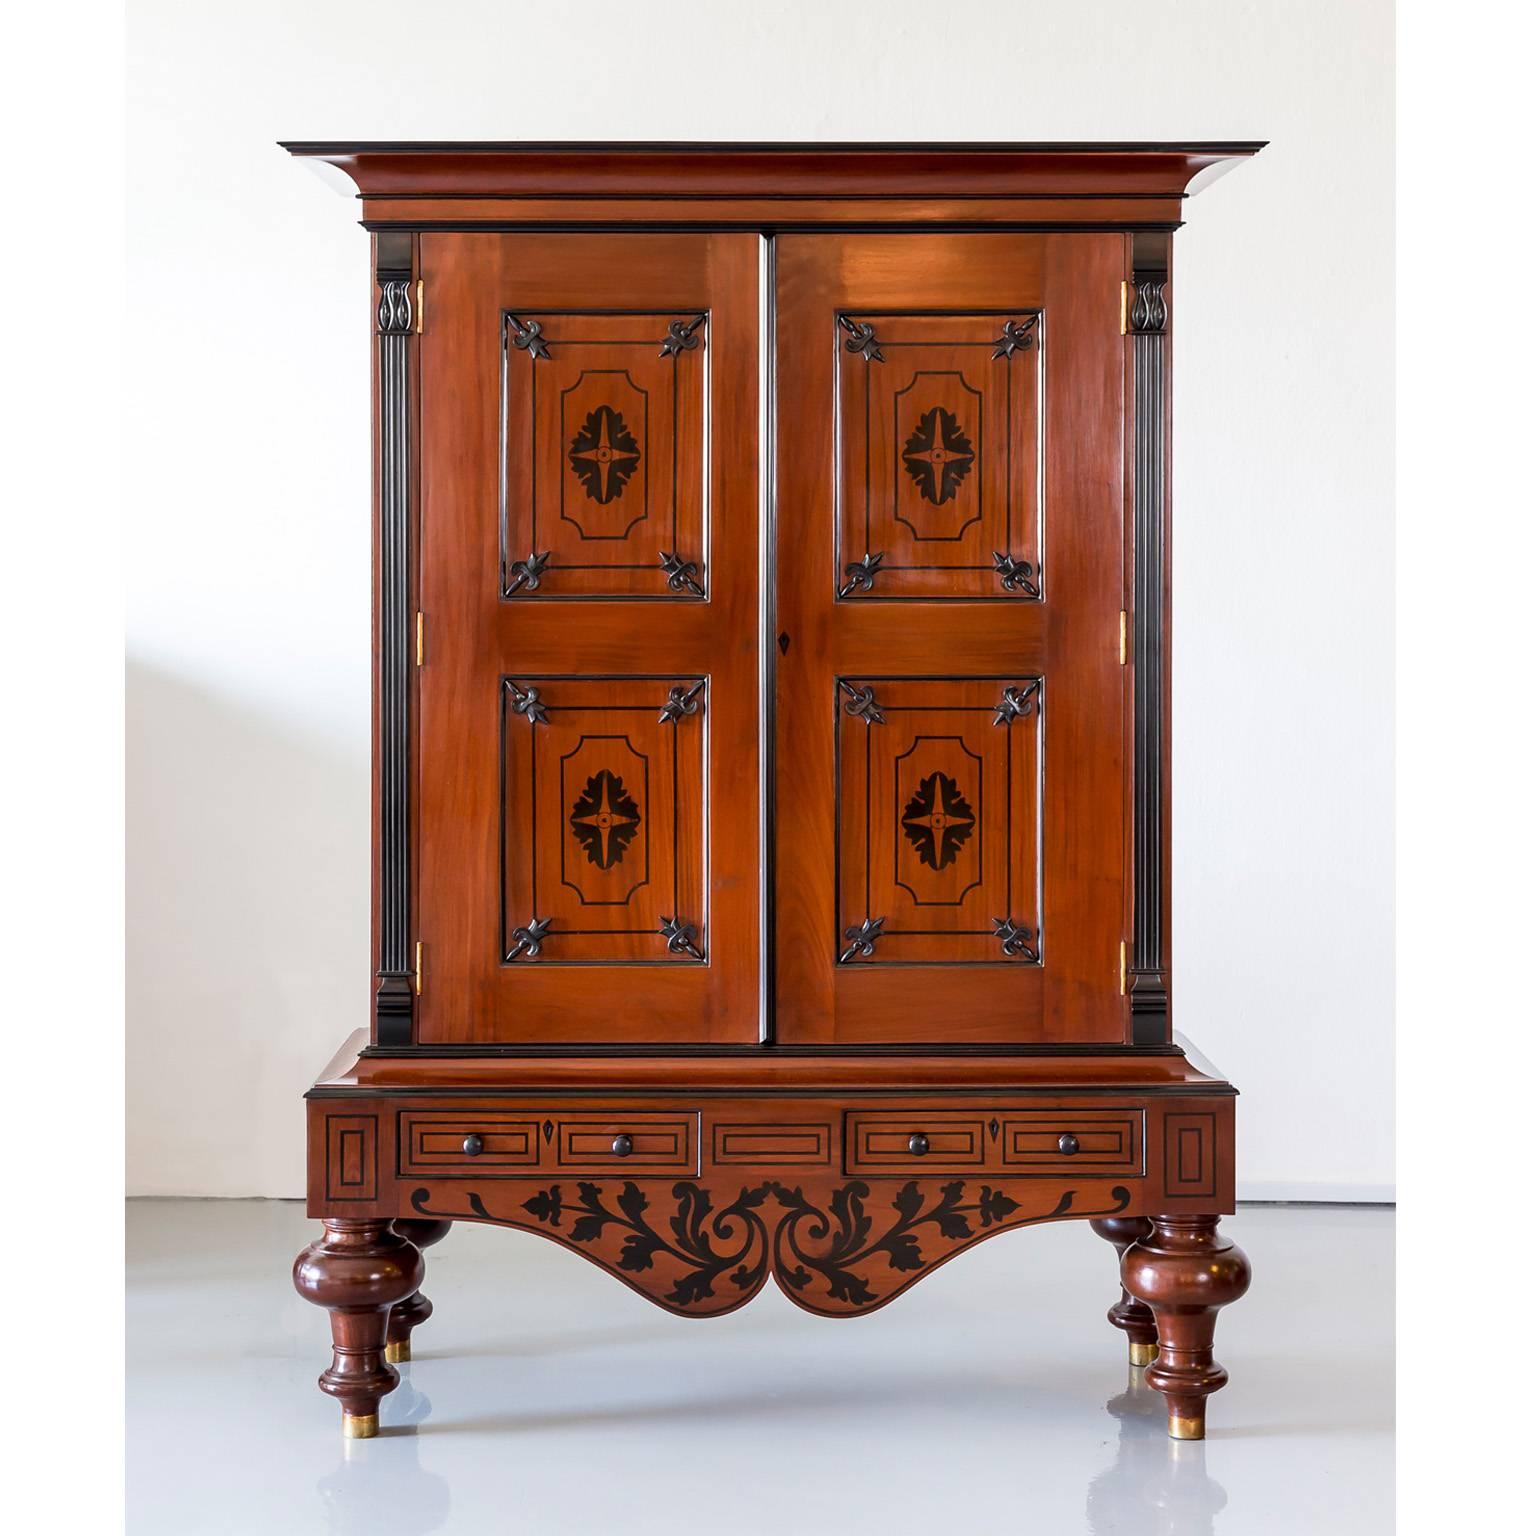 A beautiful Dutch colonial cupboard in mahogany with a deep flaring cornice with an ebony moulded edge above a short ebony frieze. The double doors are constructed with fielded panels inlaid at centre with a design in ebony, surrounded by ebony